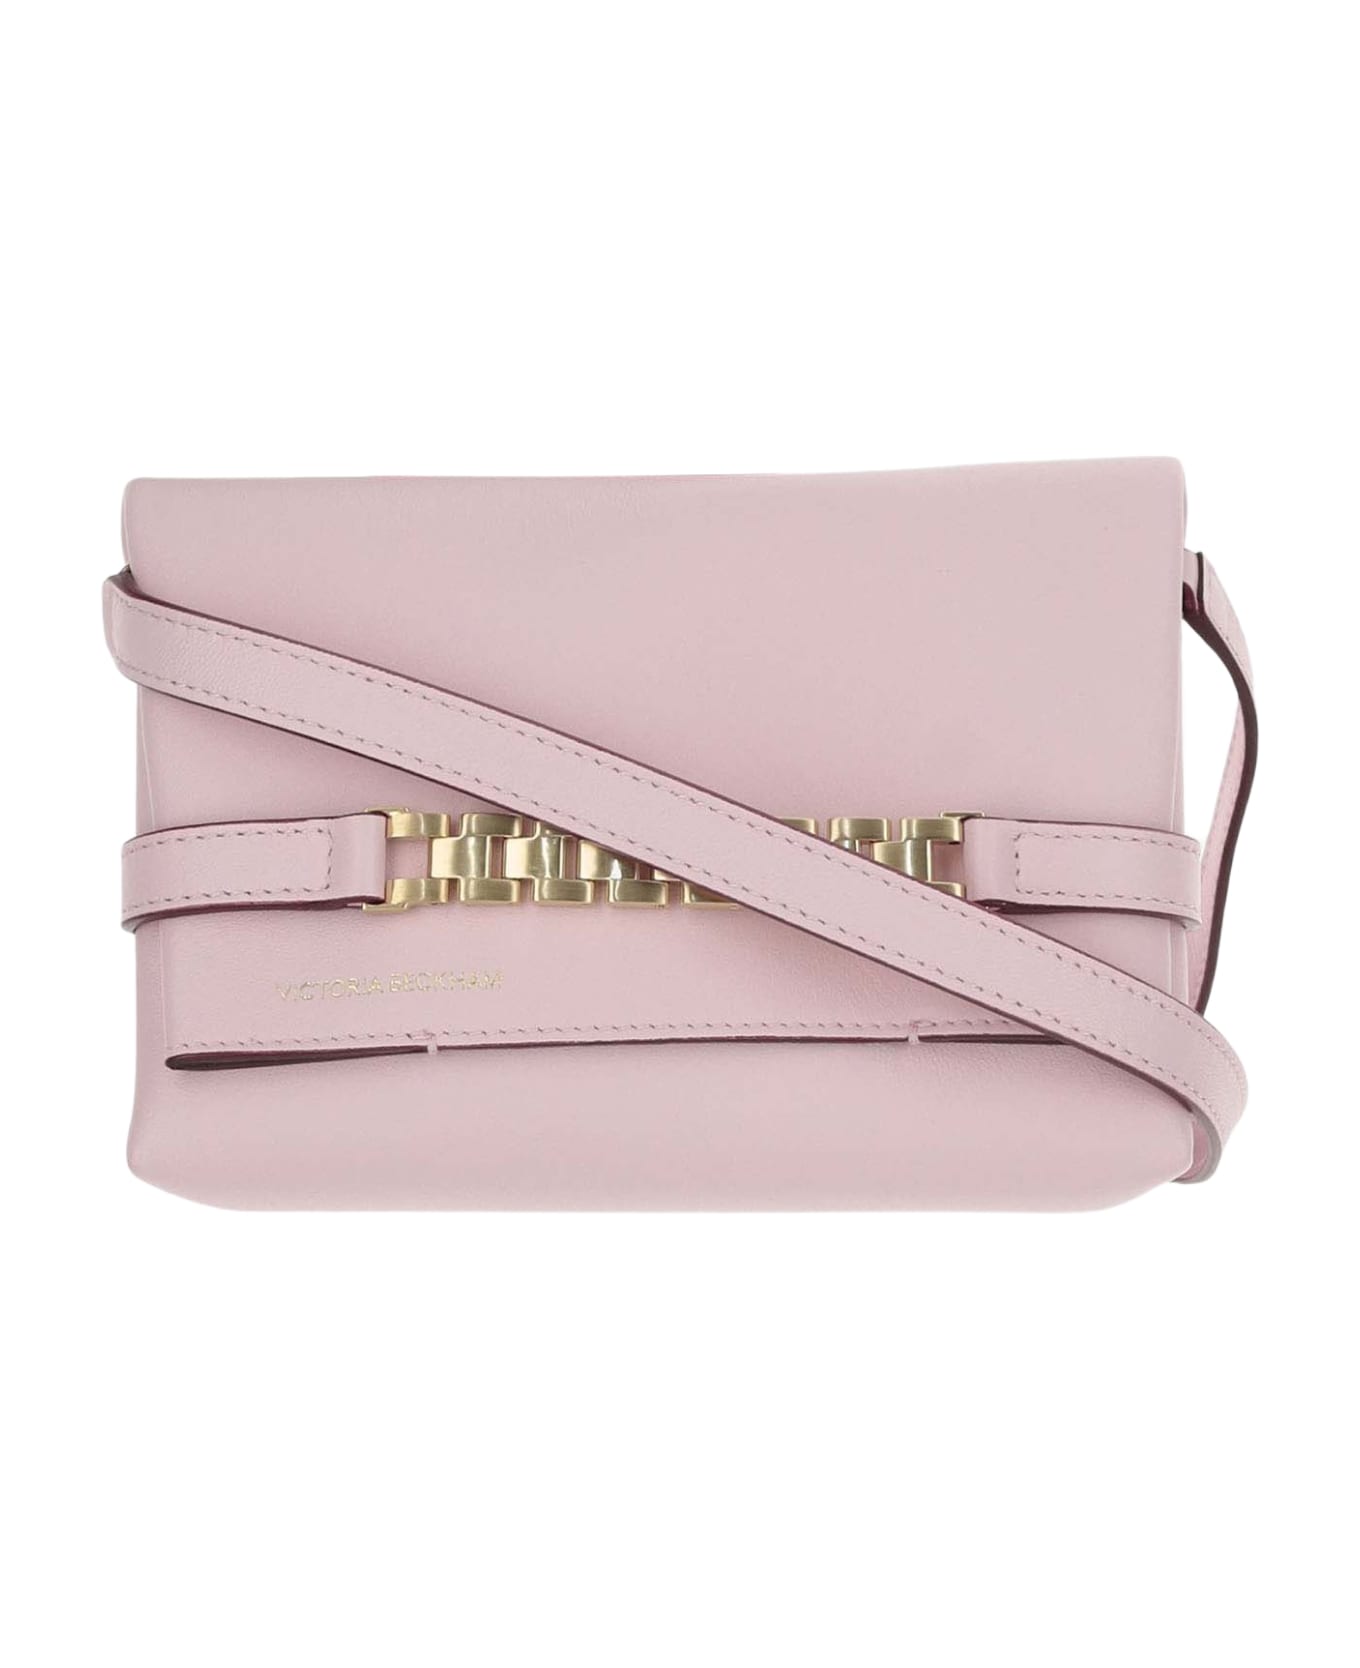 Victoria Beckham Shoulder Bag With Chain - Pink ショルダーバッグ